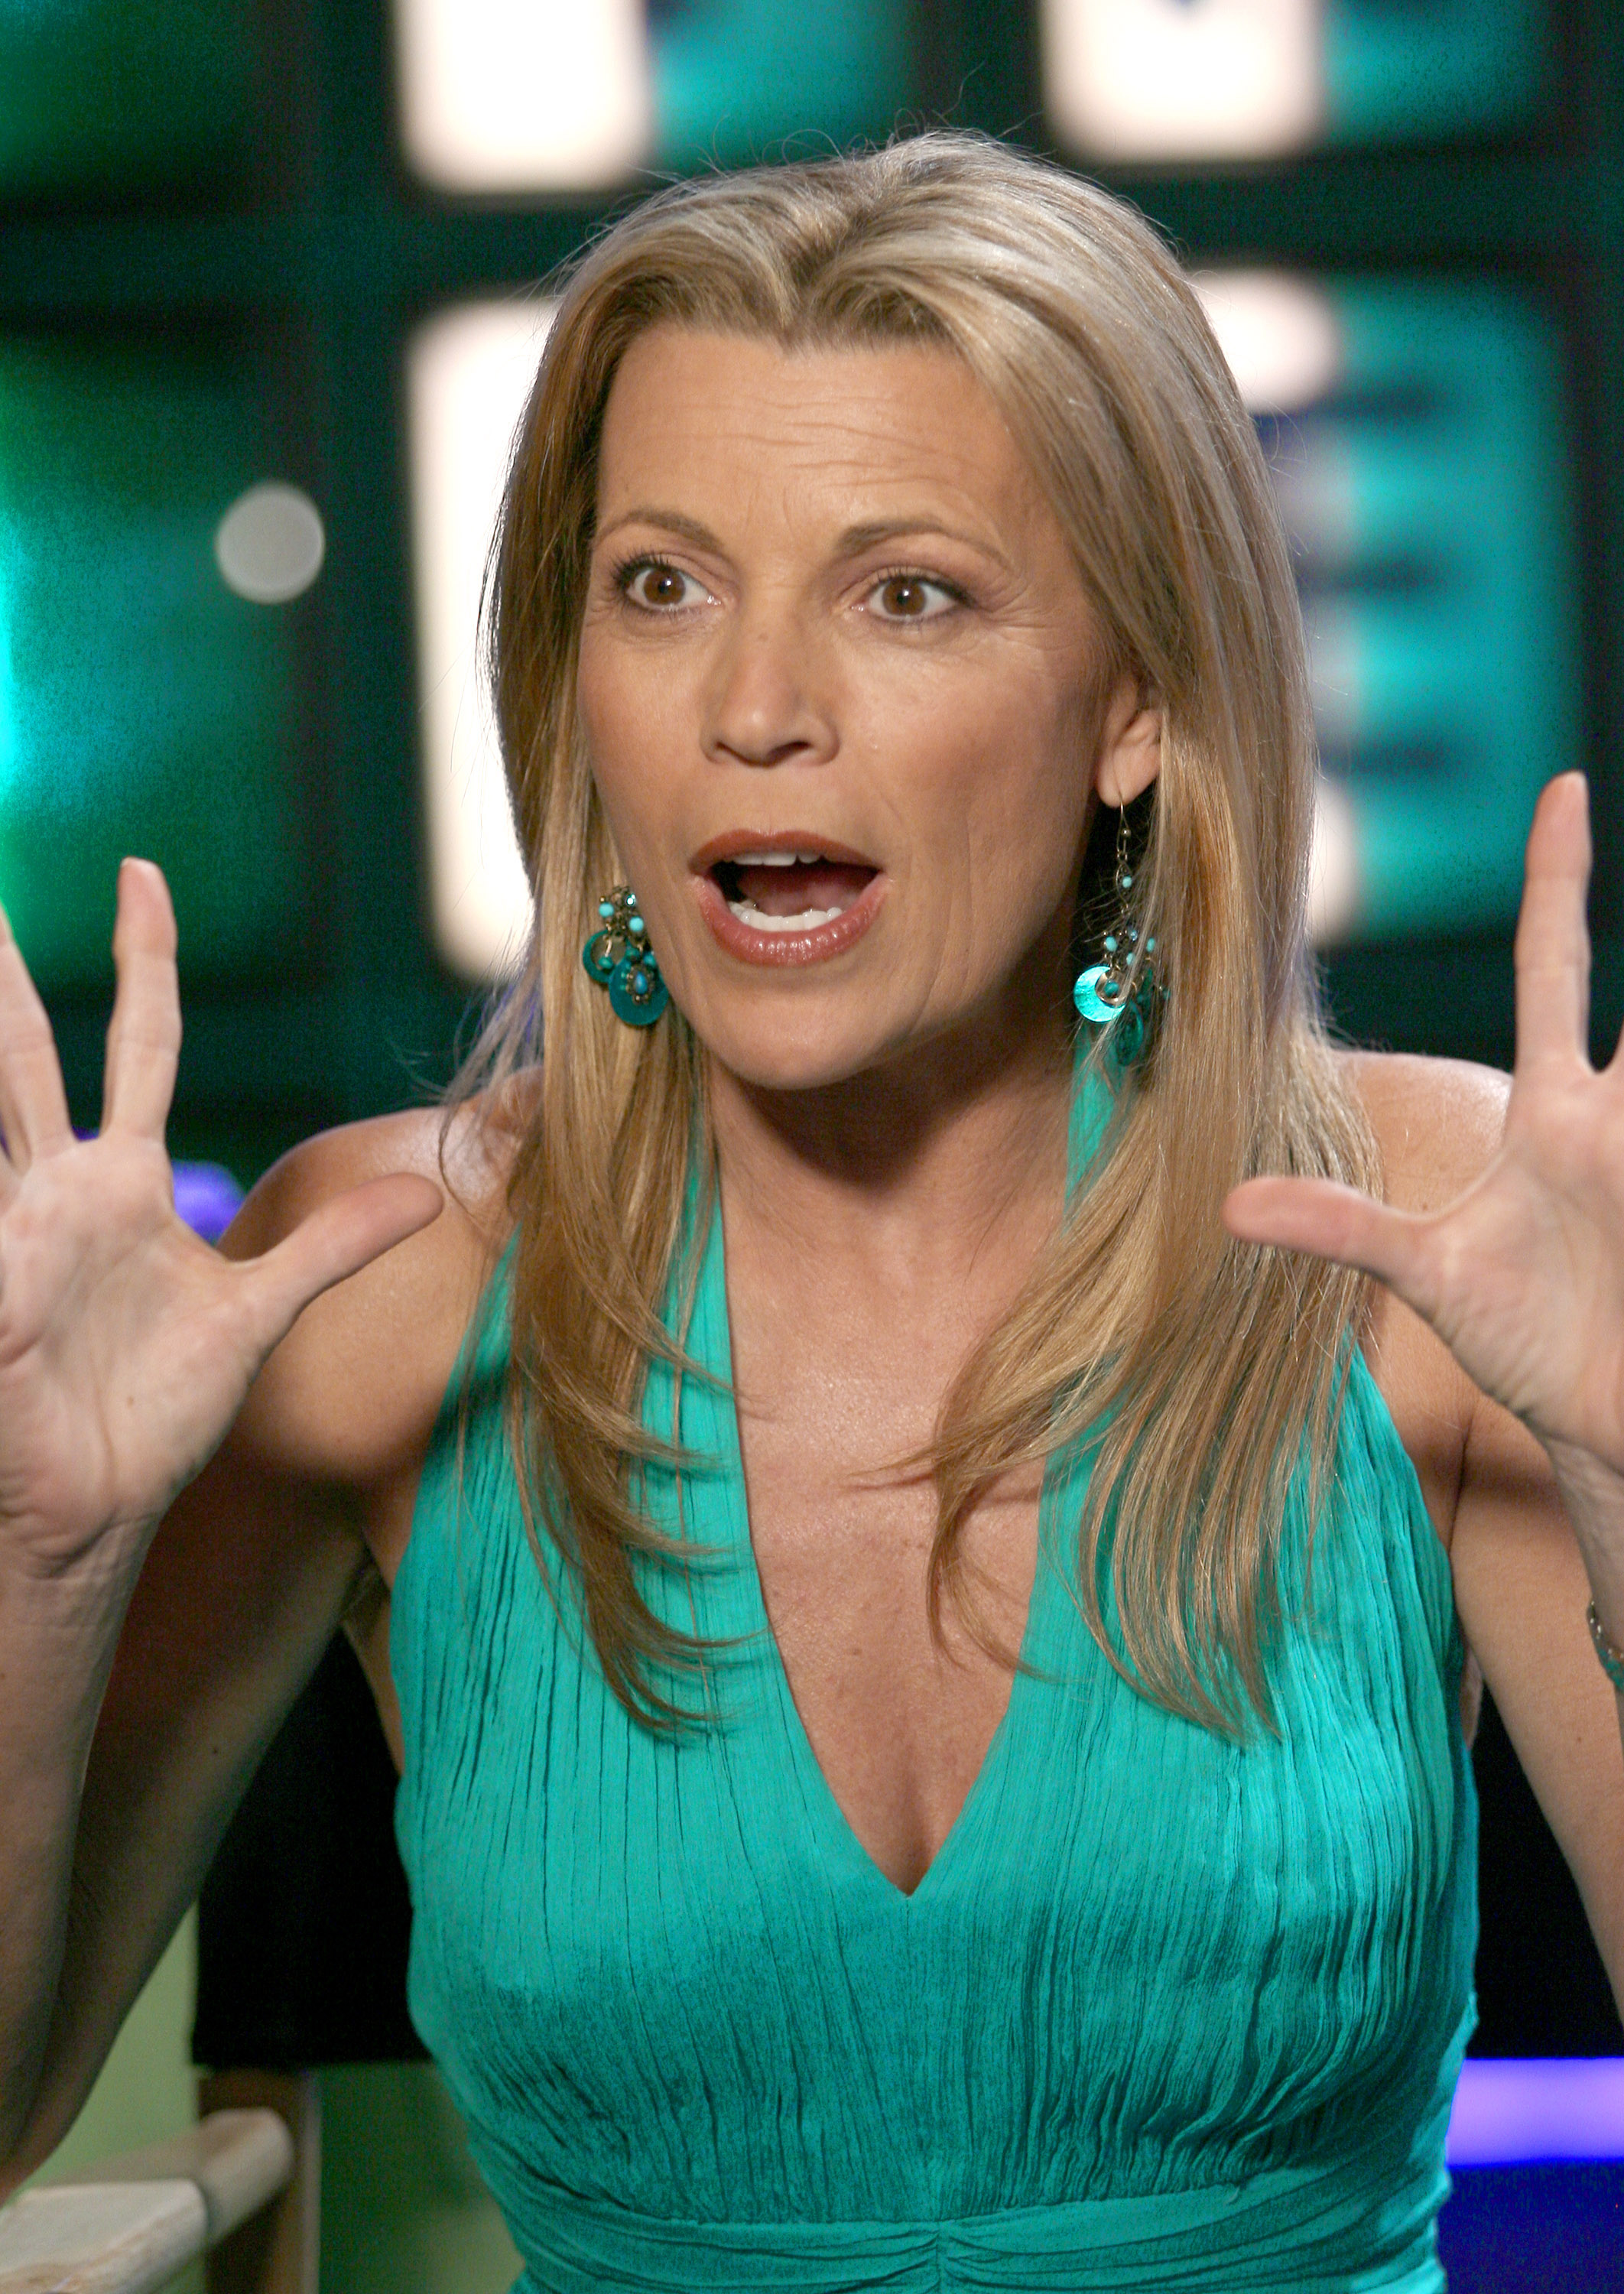 Vanna White during "Wheel of Fortune" and "Jeopardy!" at Sony Studios on September 12, 2006 in Culver City, California | Source: Getty Images